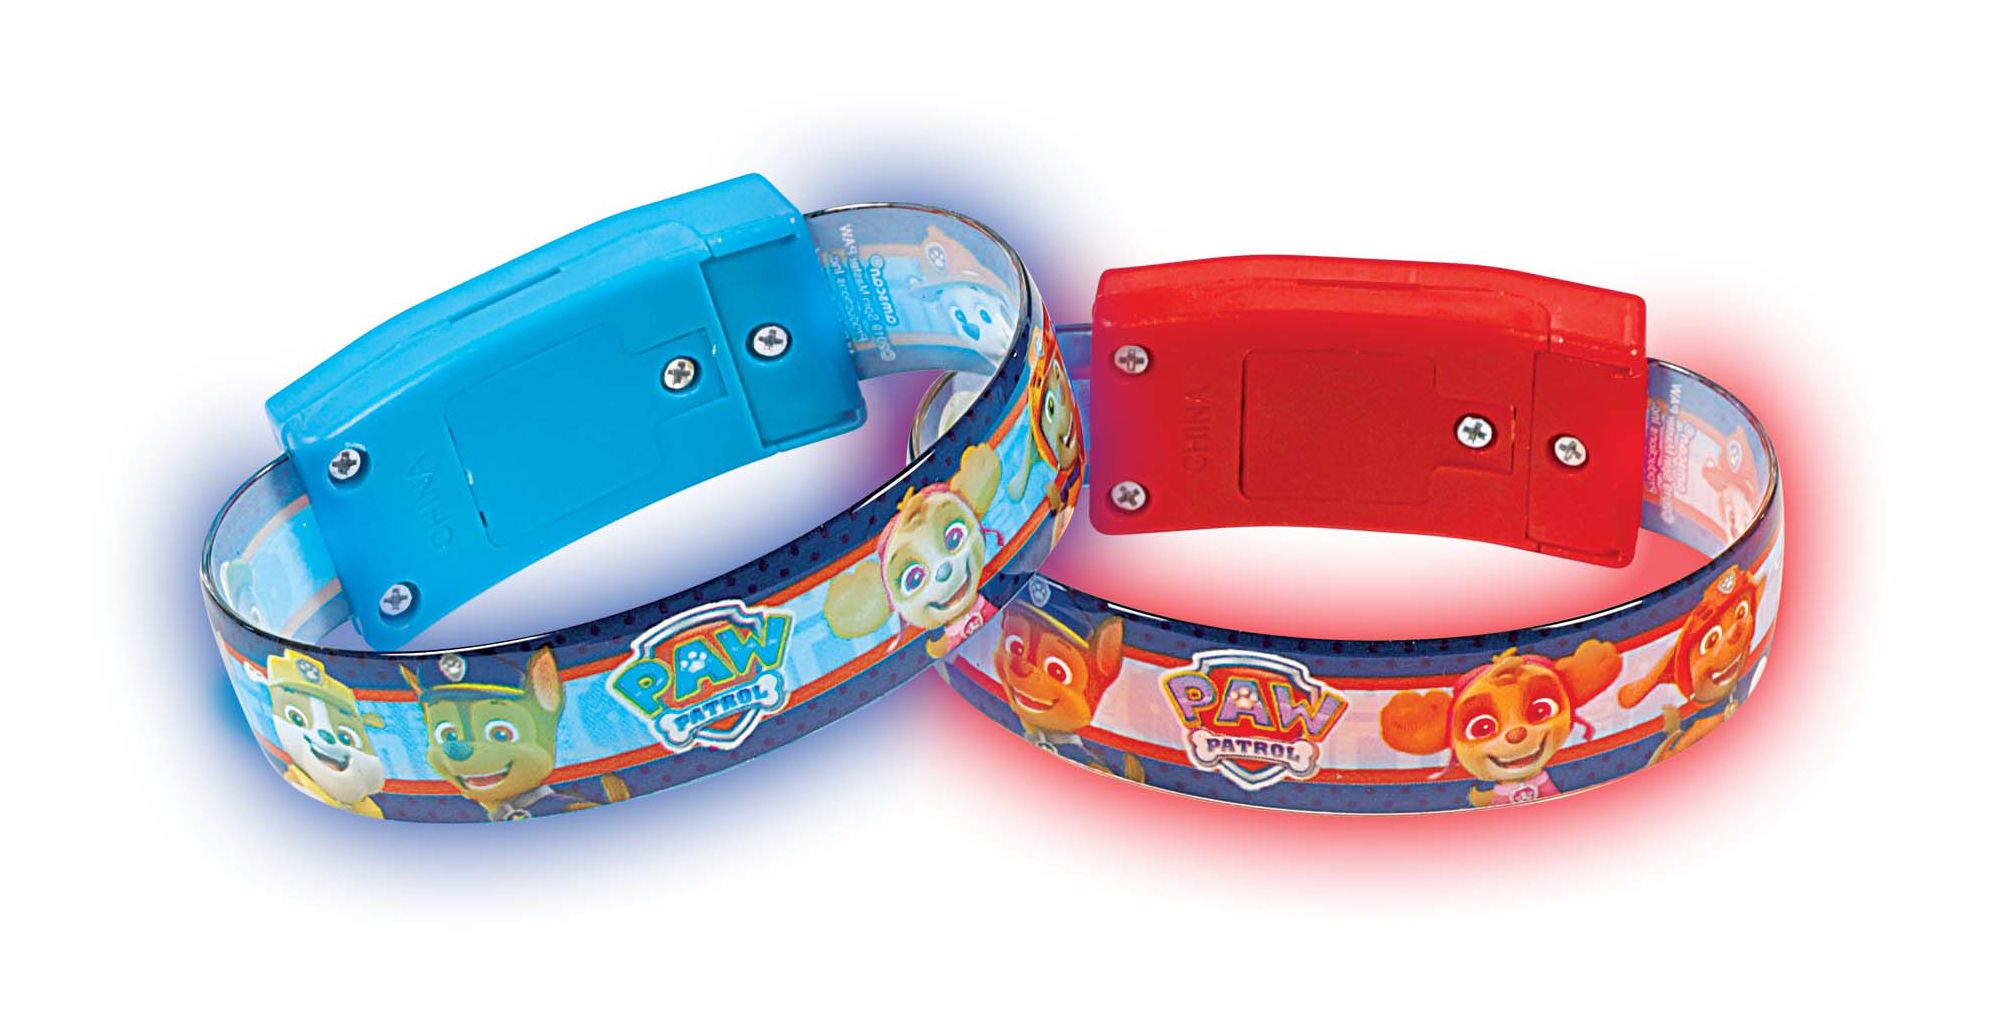 Nickelodeon PAW Patrol Light-Up Bracelets, Blue/Red, One Size, 4-pk,  Wearable Favours for Birthdays | Party City